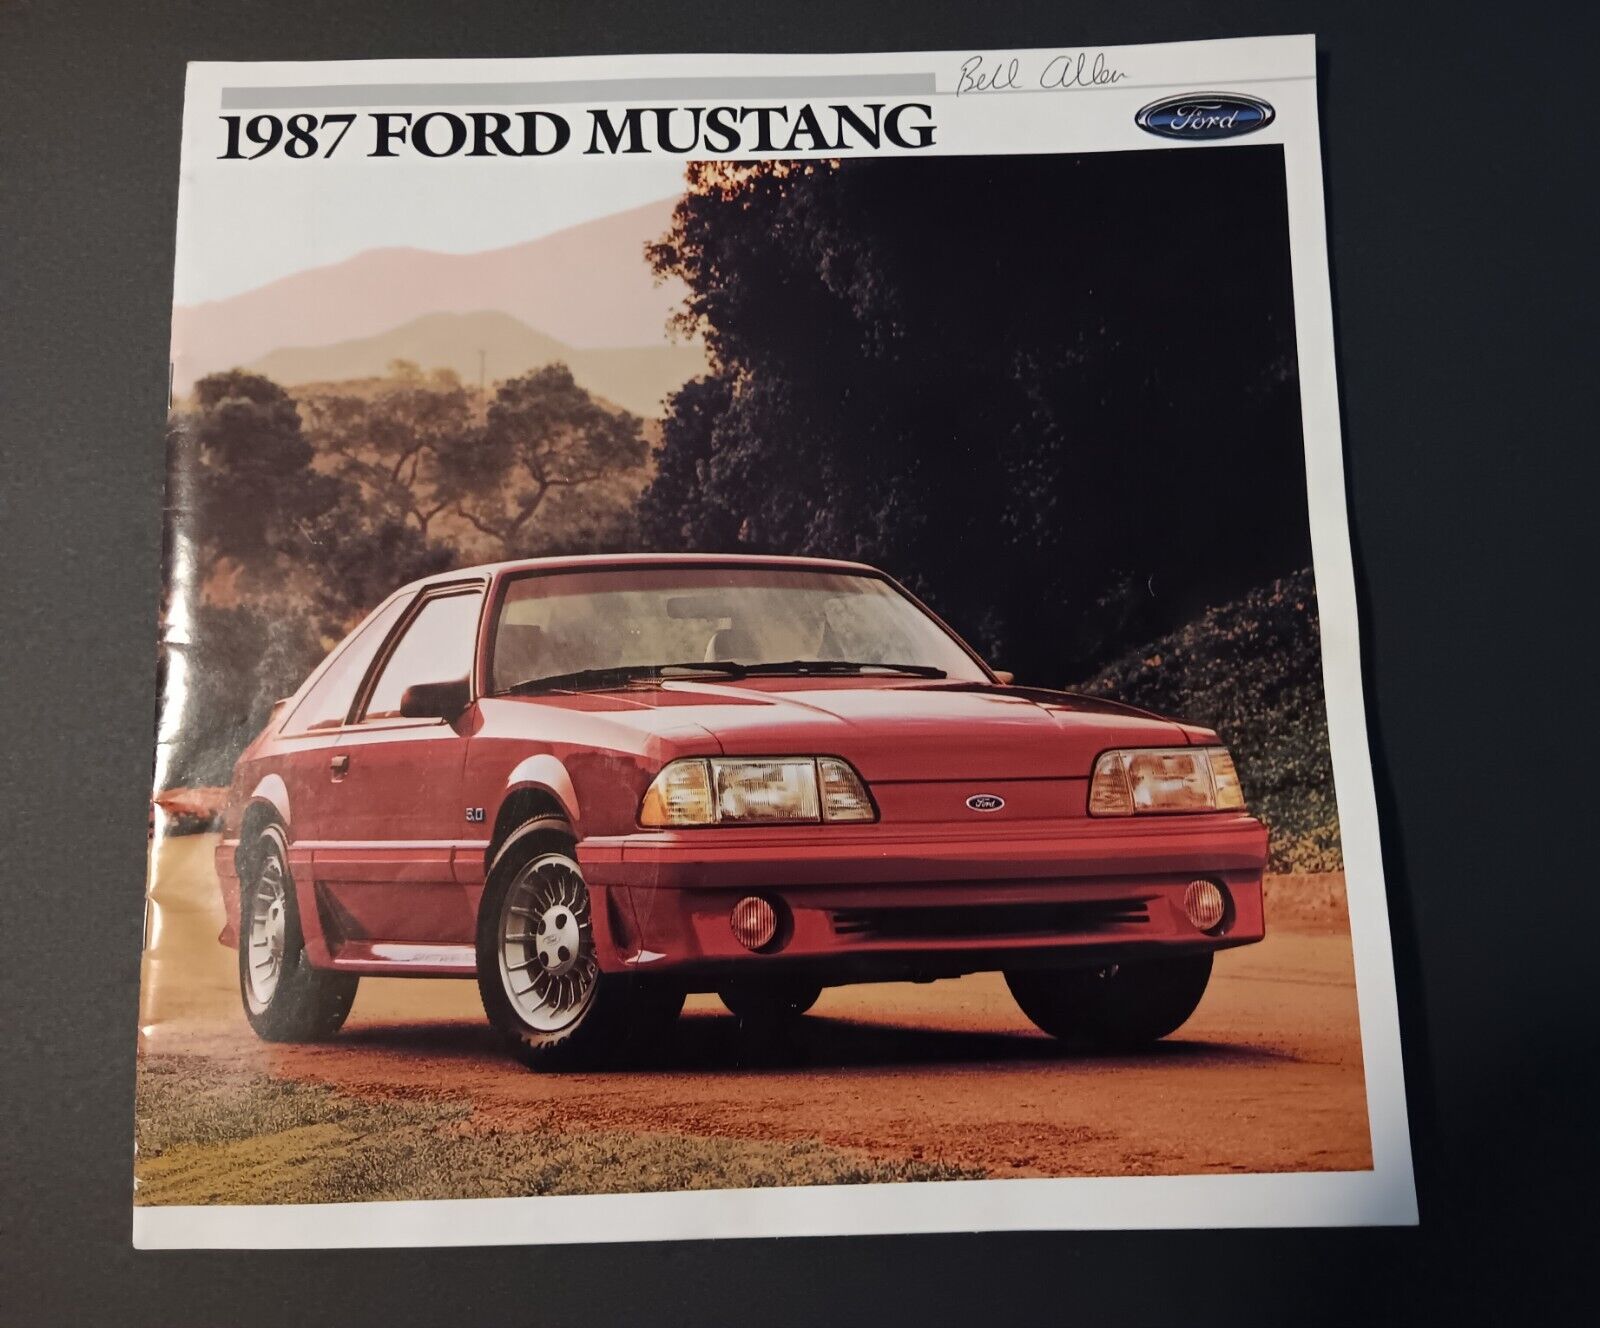 1987 FORD MUSTANG SALES BROCHURE 20 PAGES